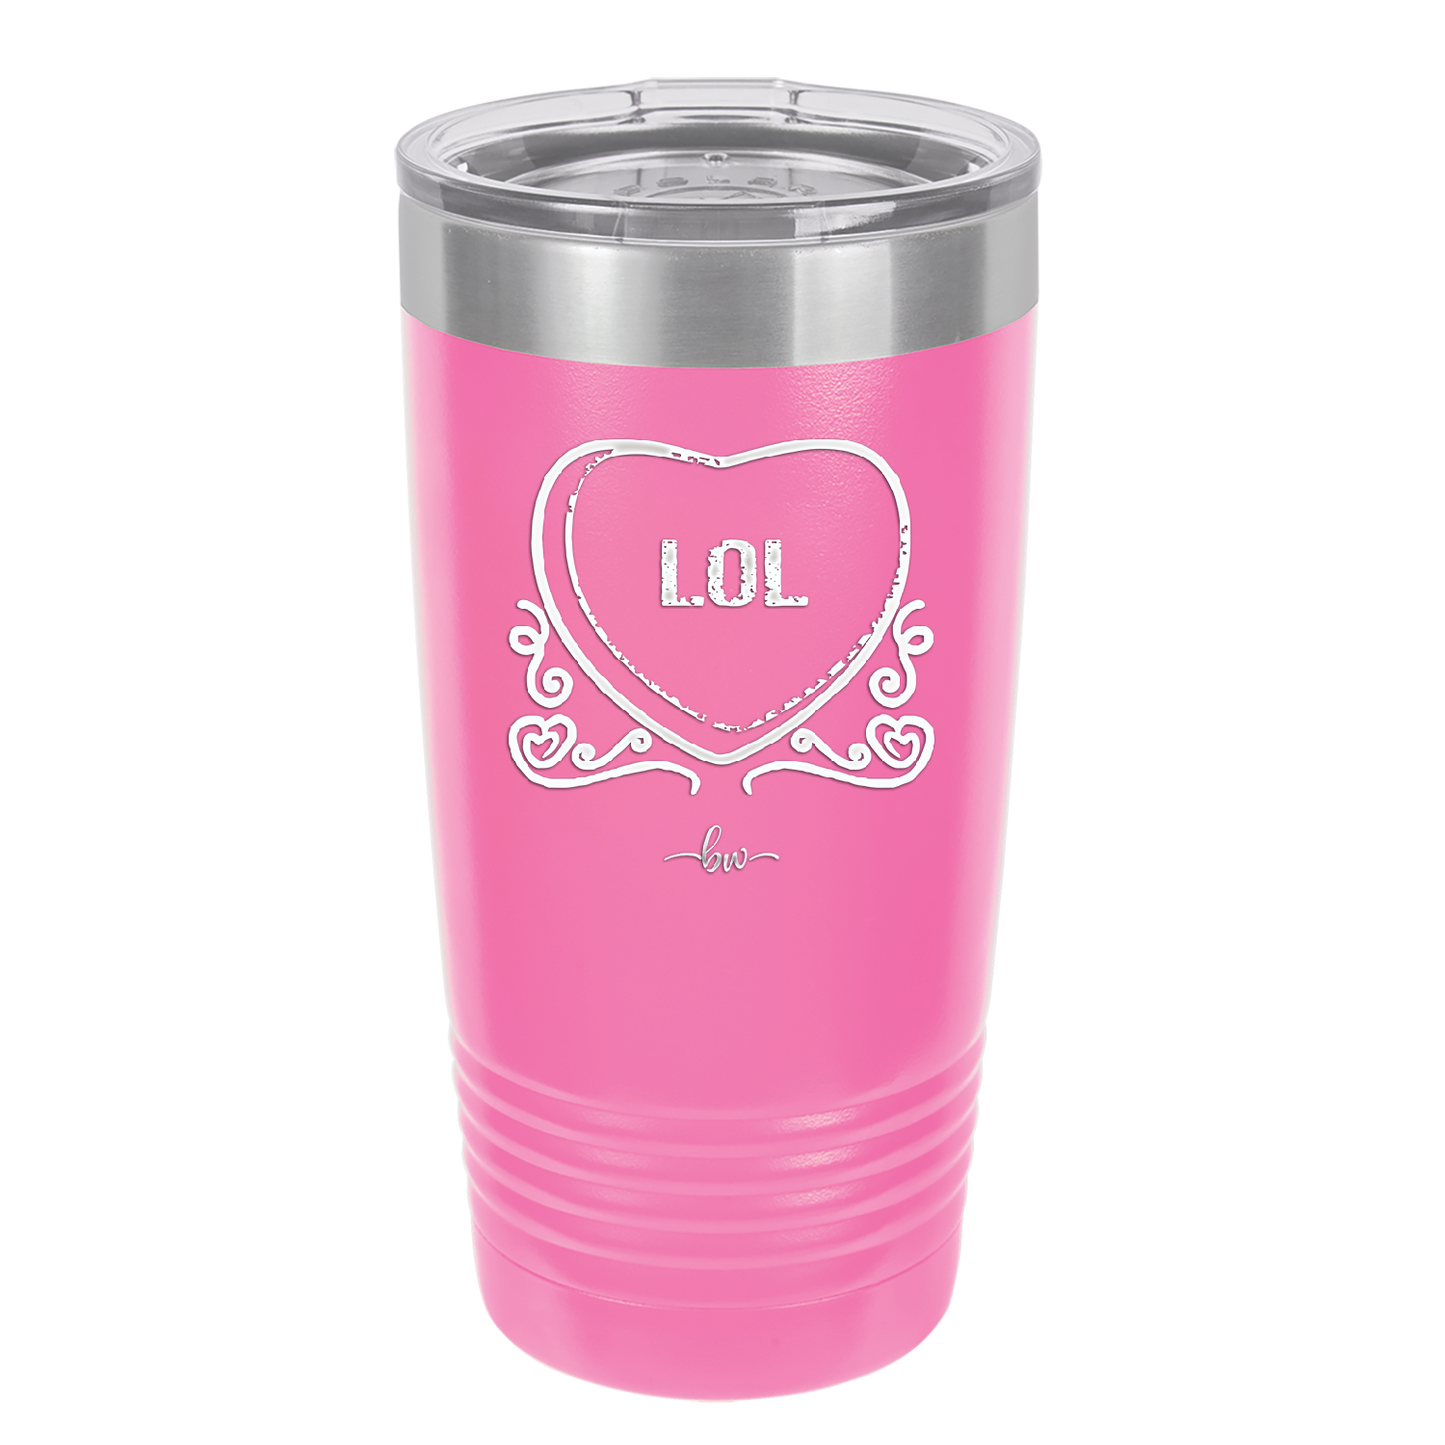 Candy Heart LOL - Laser Engraved Stainless Steel Drinkware - 1759 -